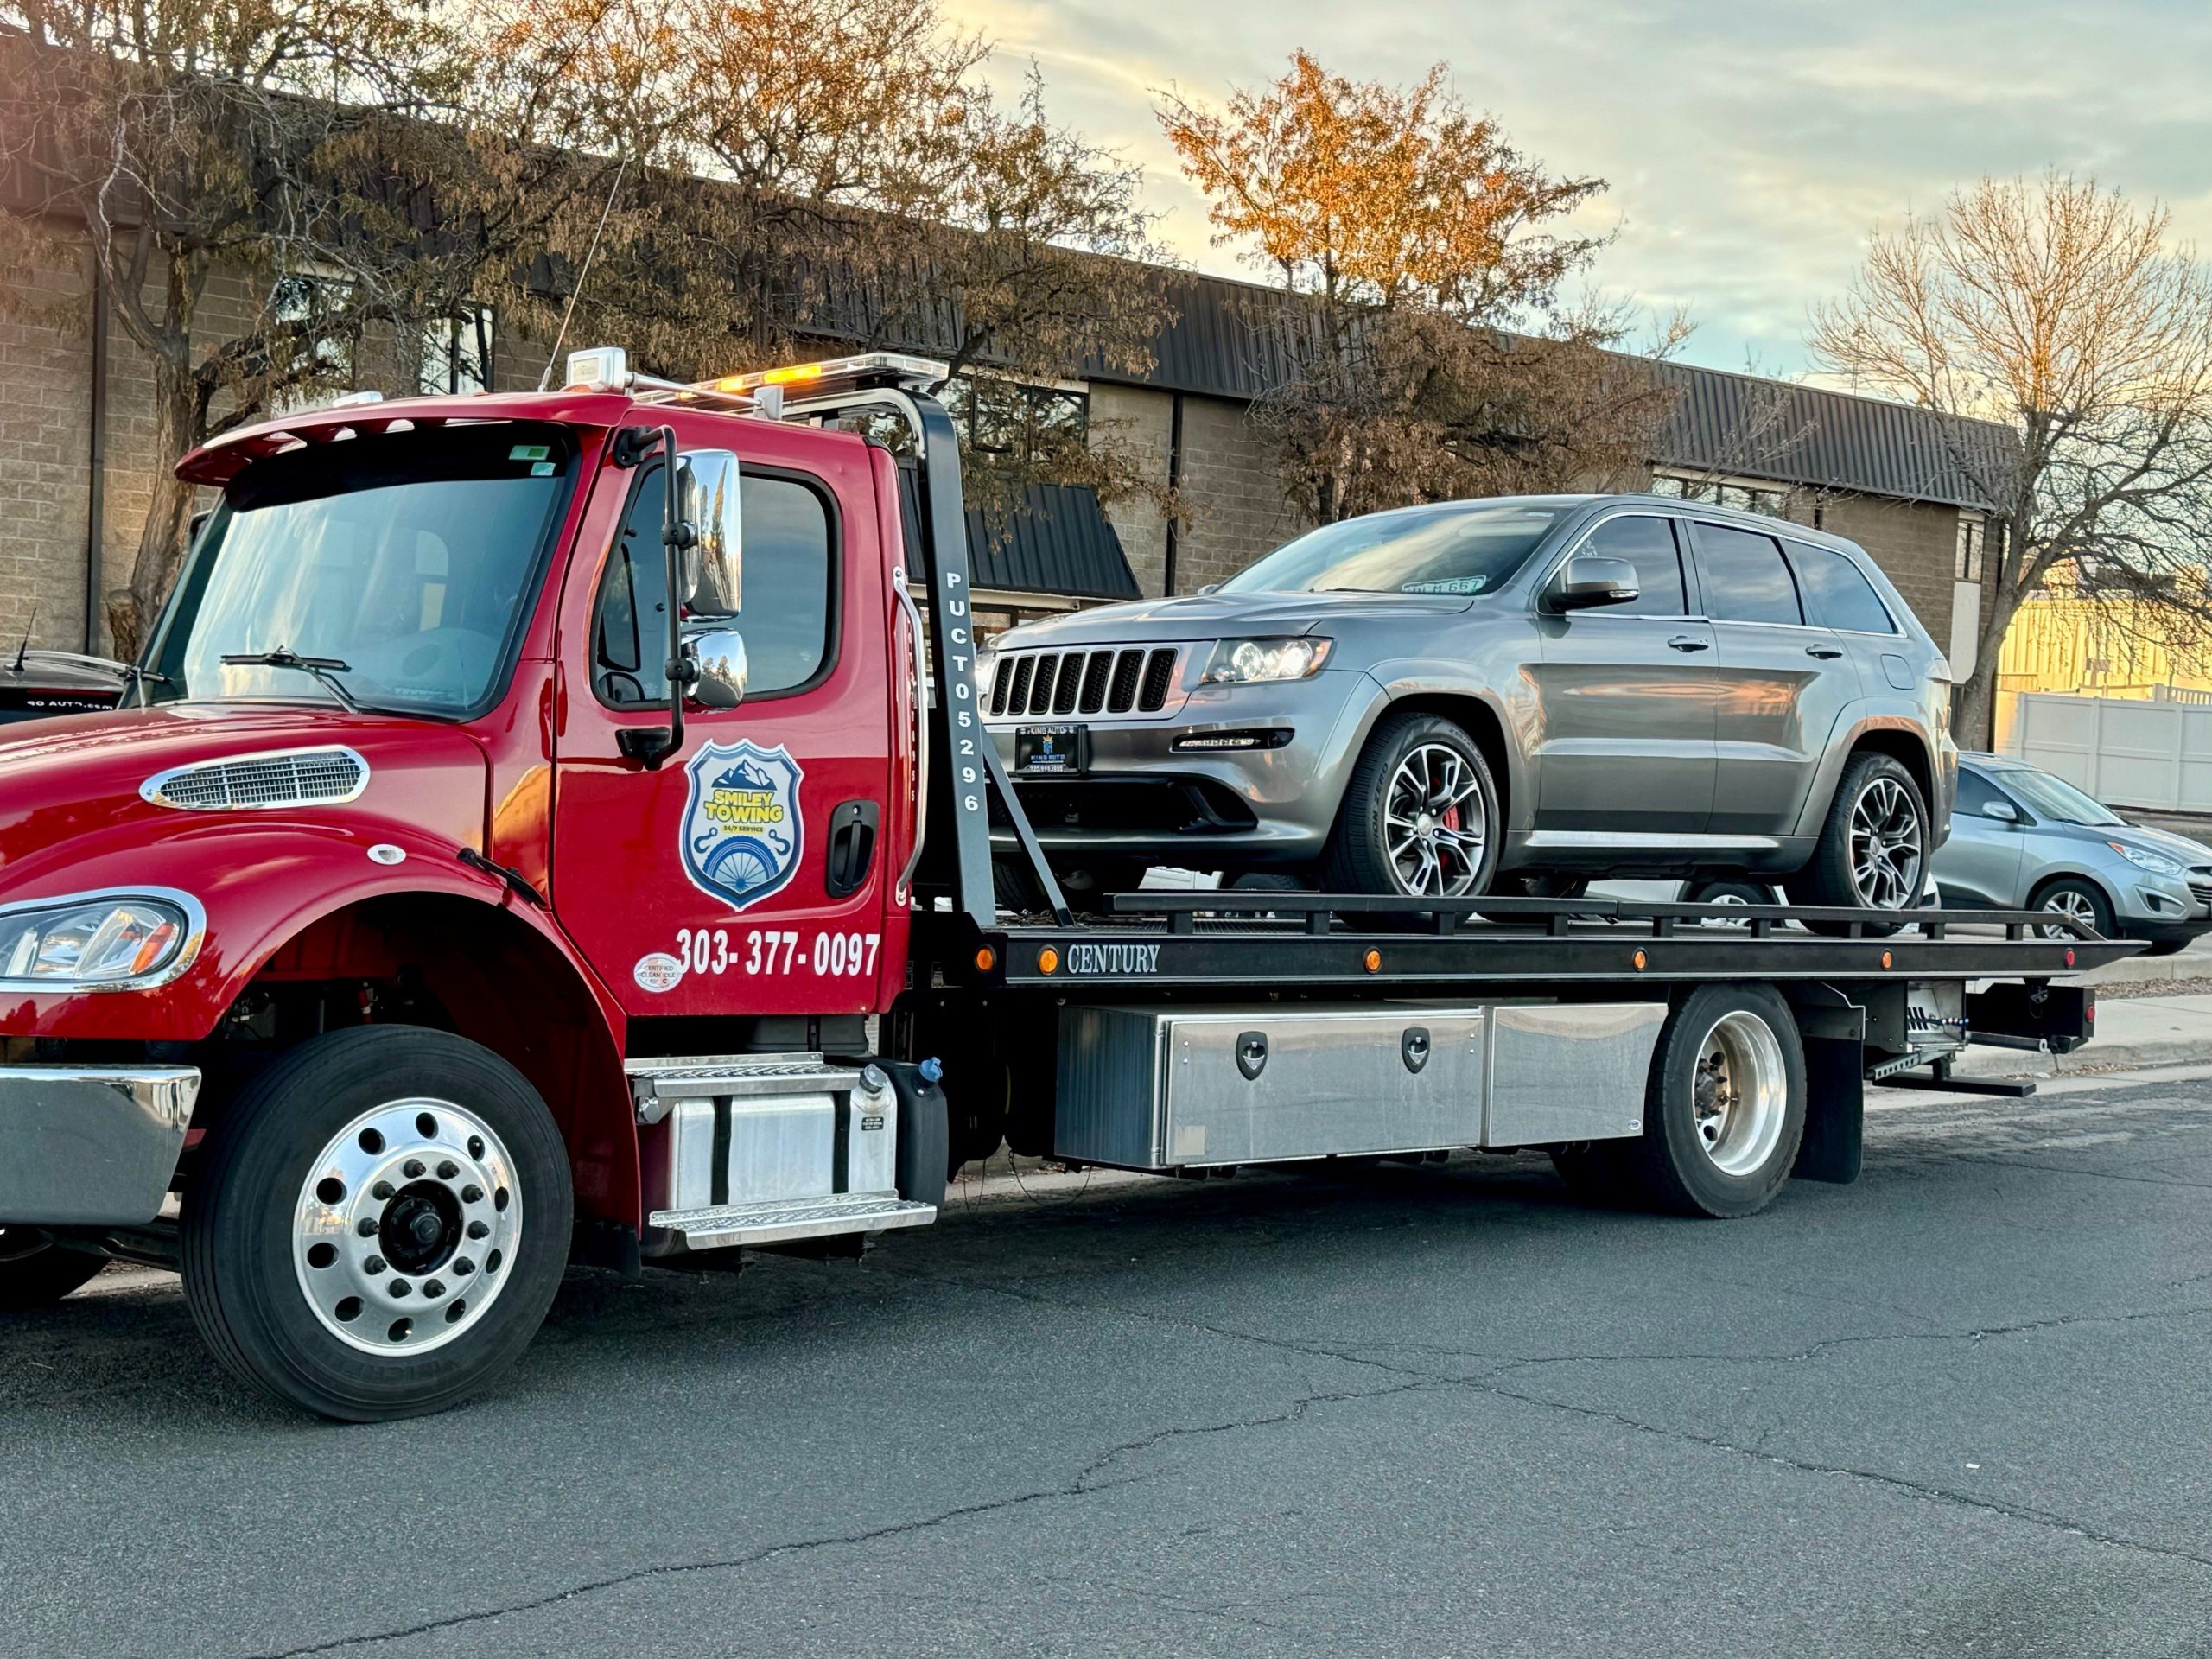 this image shows towing services in Sheridan, CO